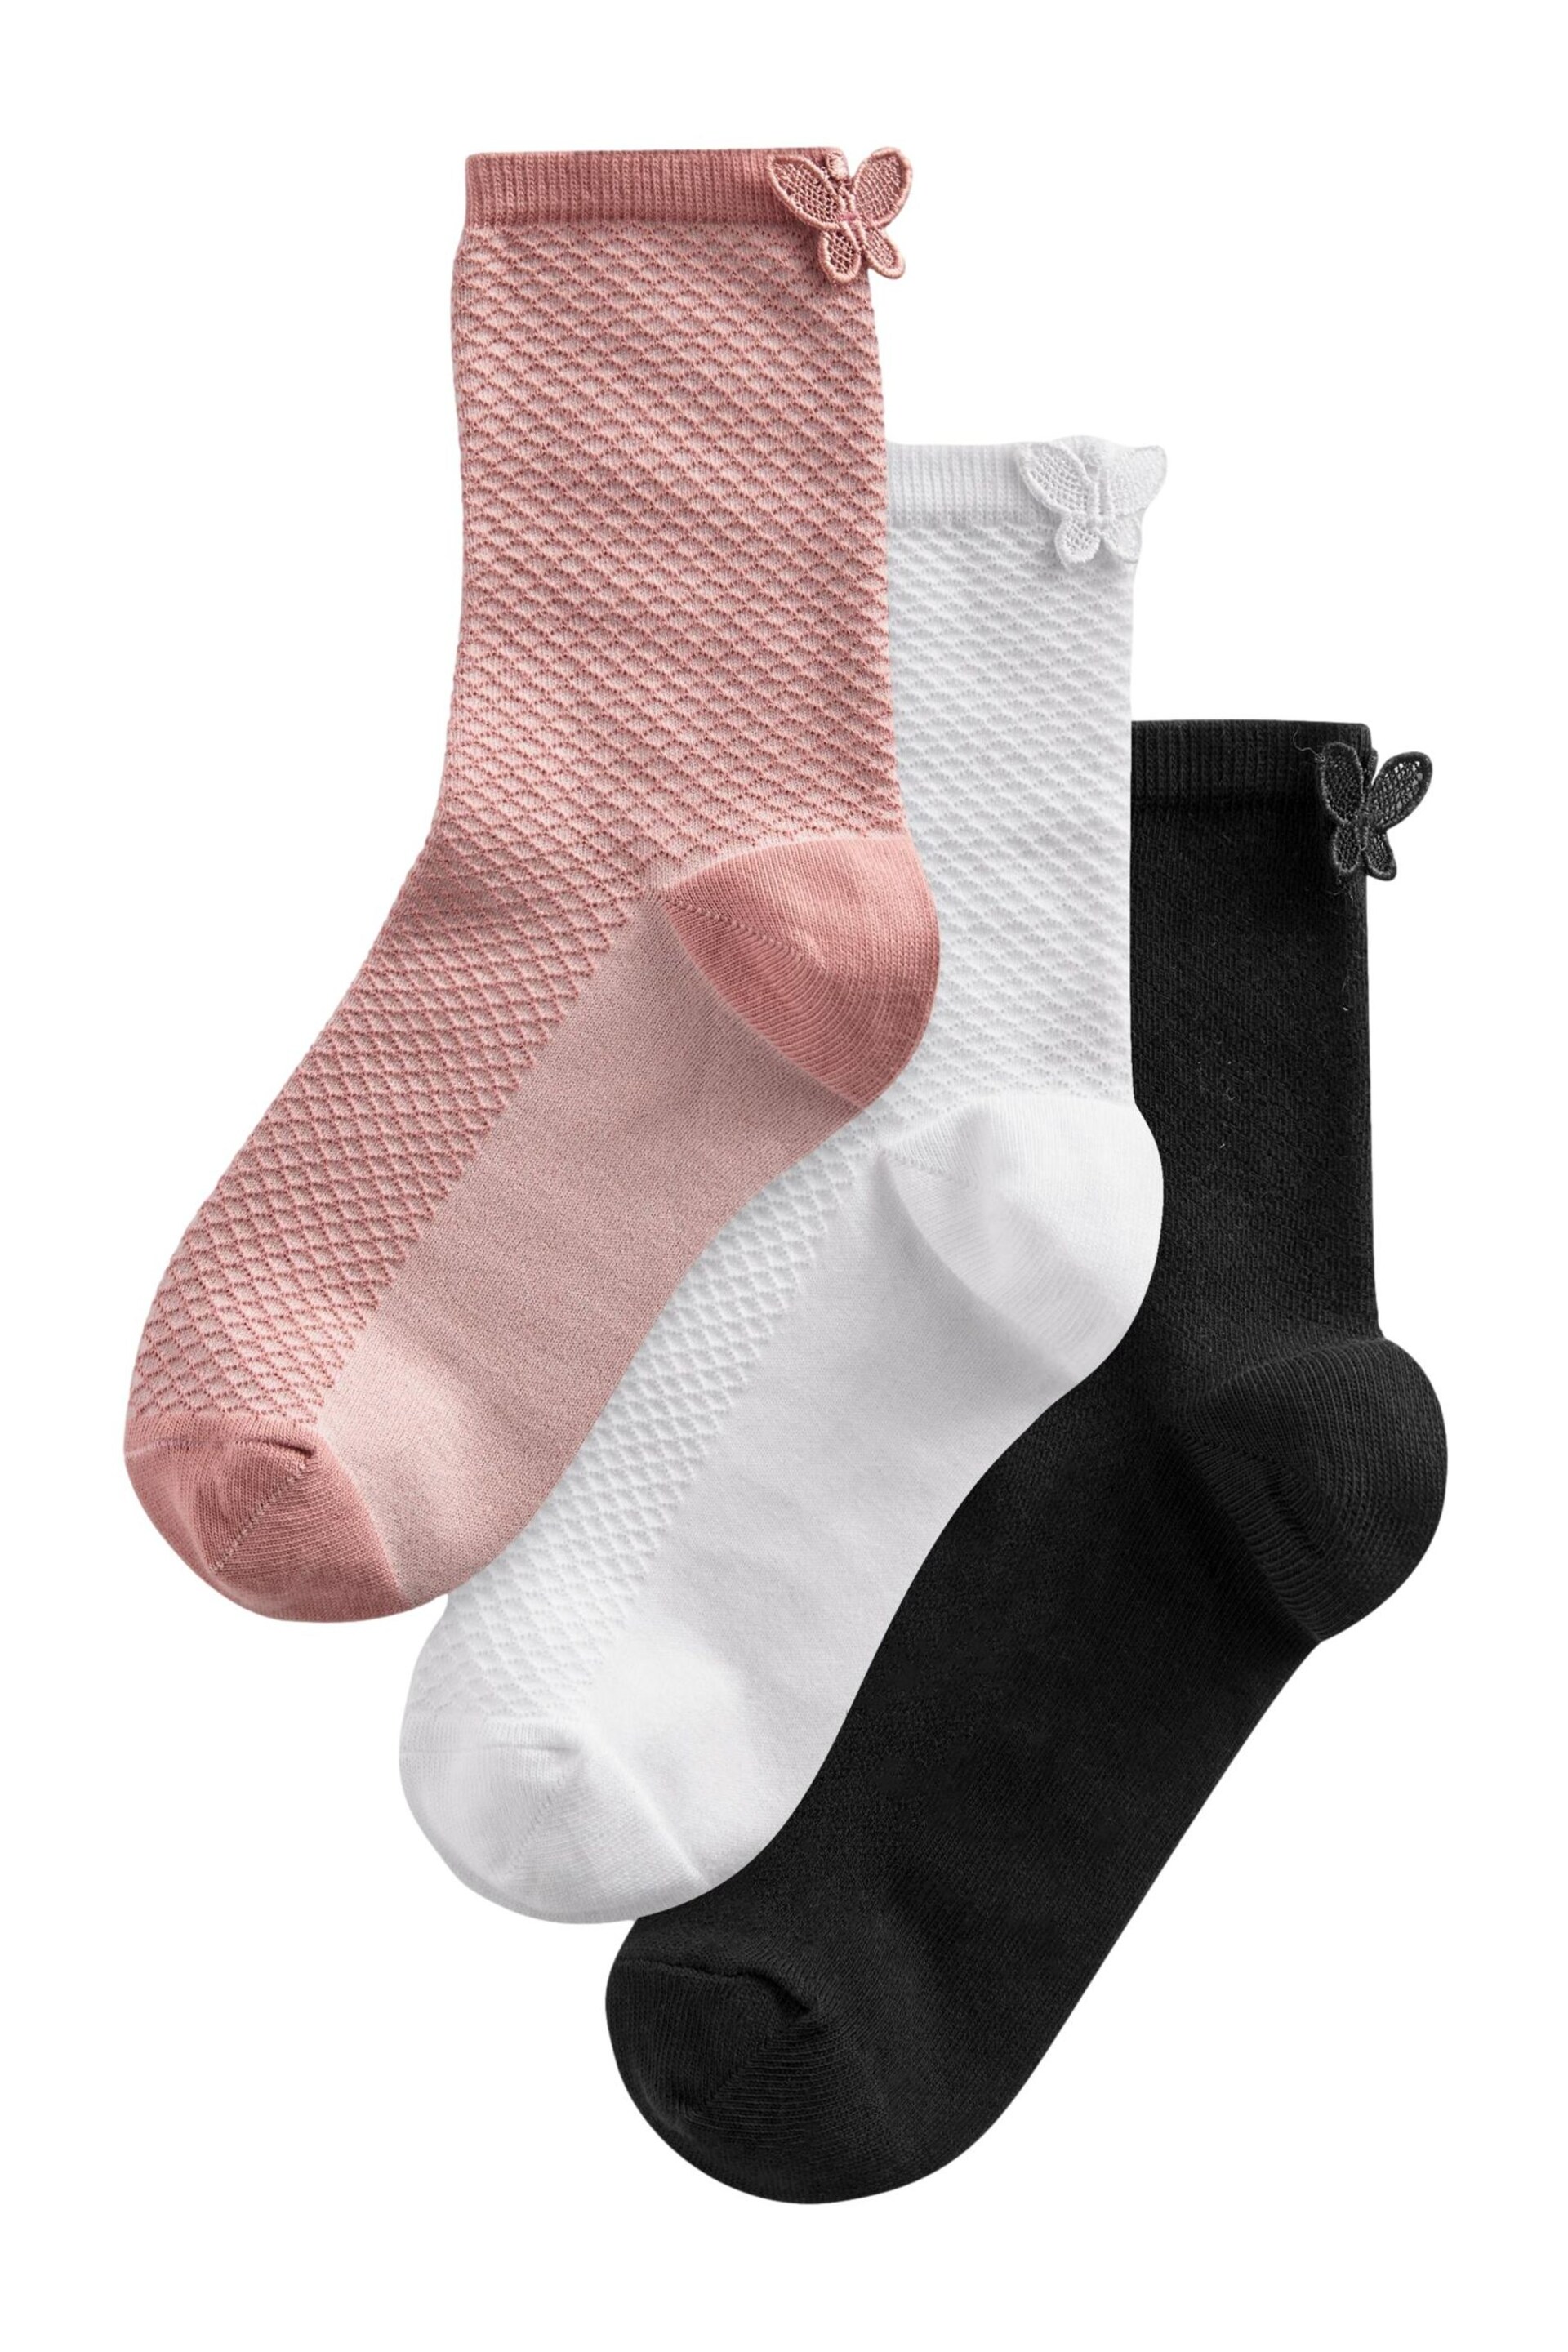 Black/White/Pink Butterfly Ankle Socks 3 Pack - Image 1 of 8